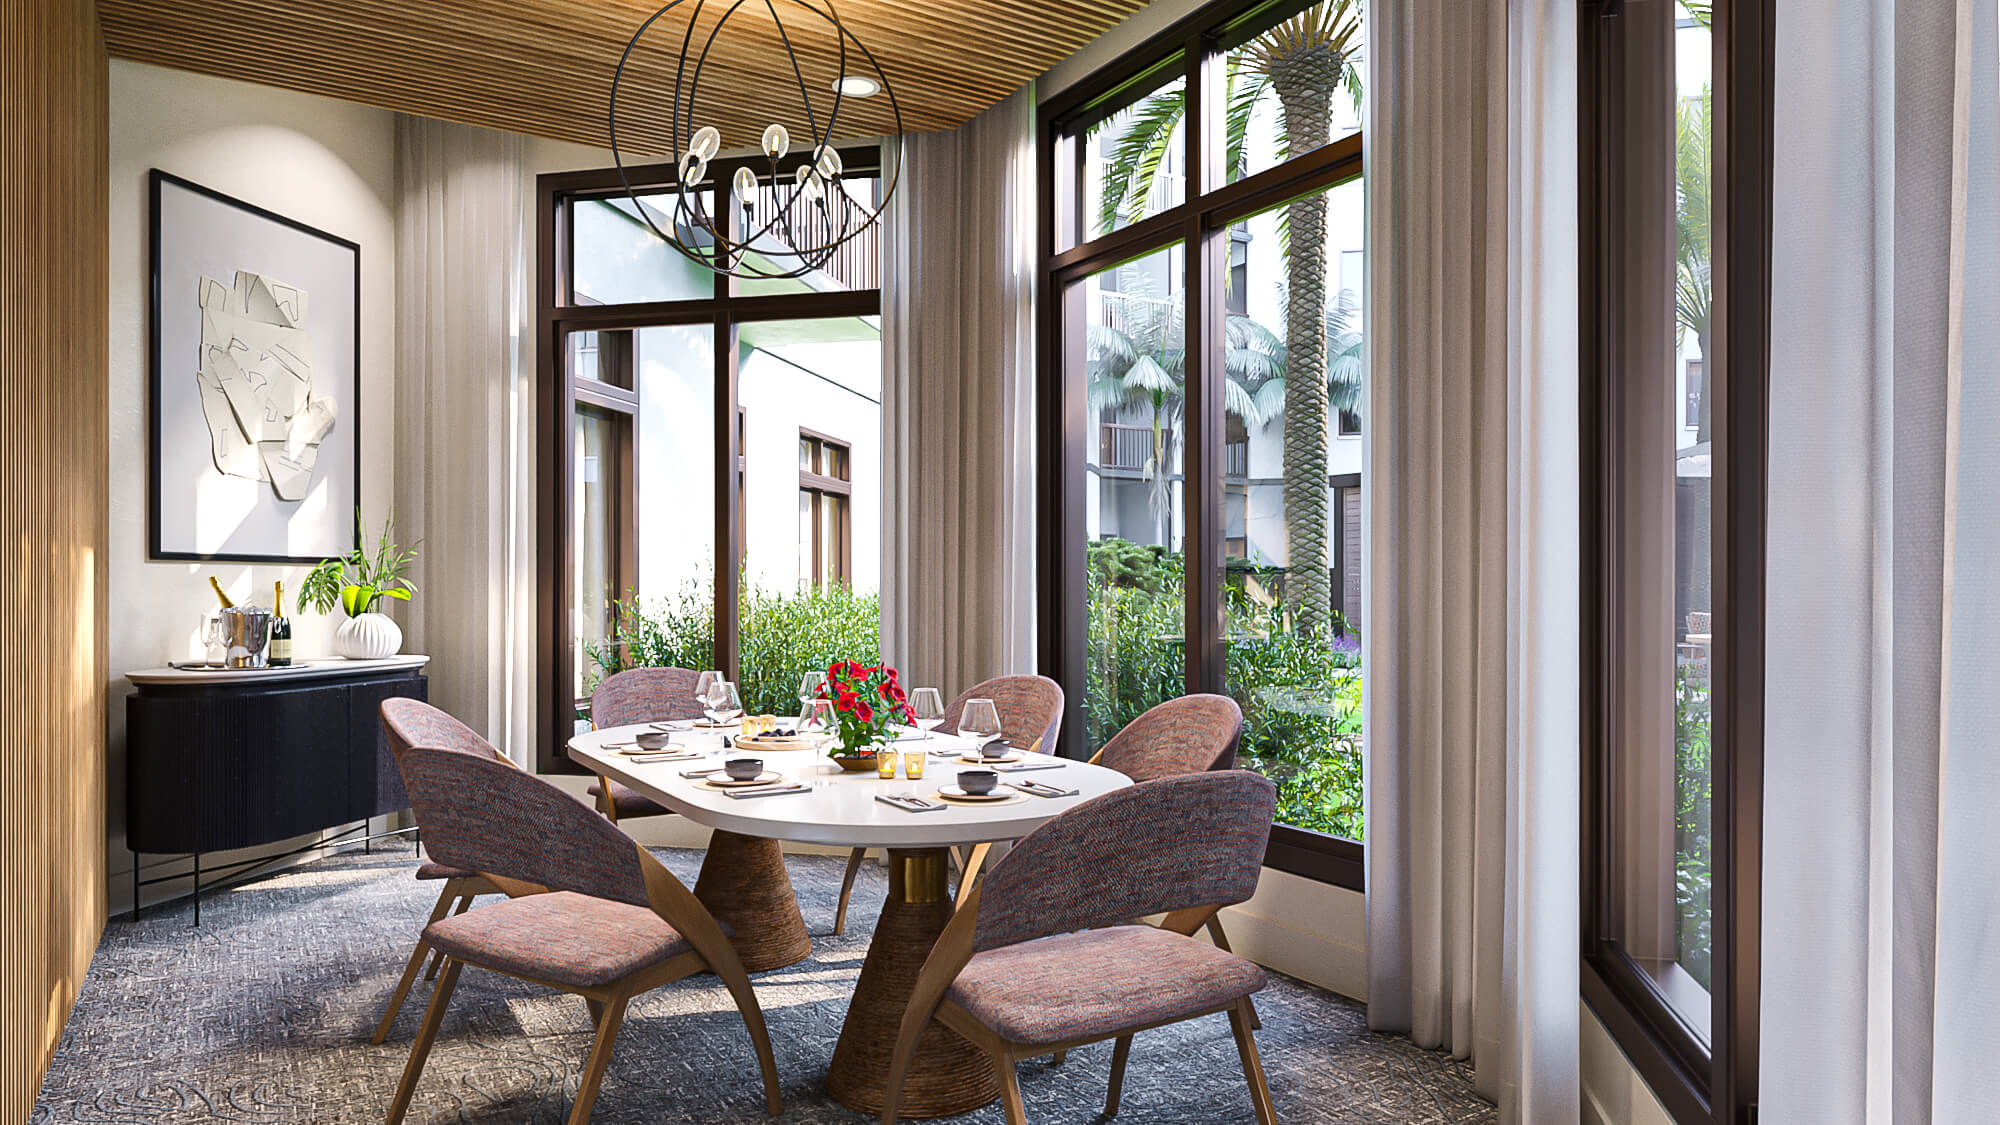 The Arbor at Delray dining room rendering